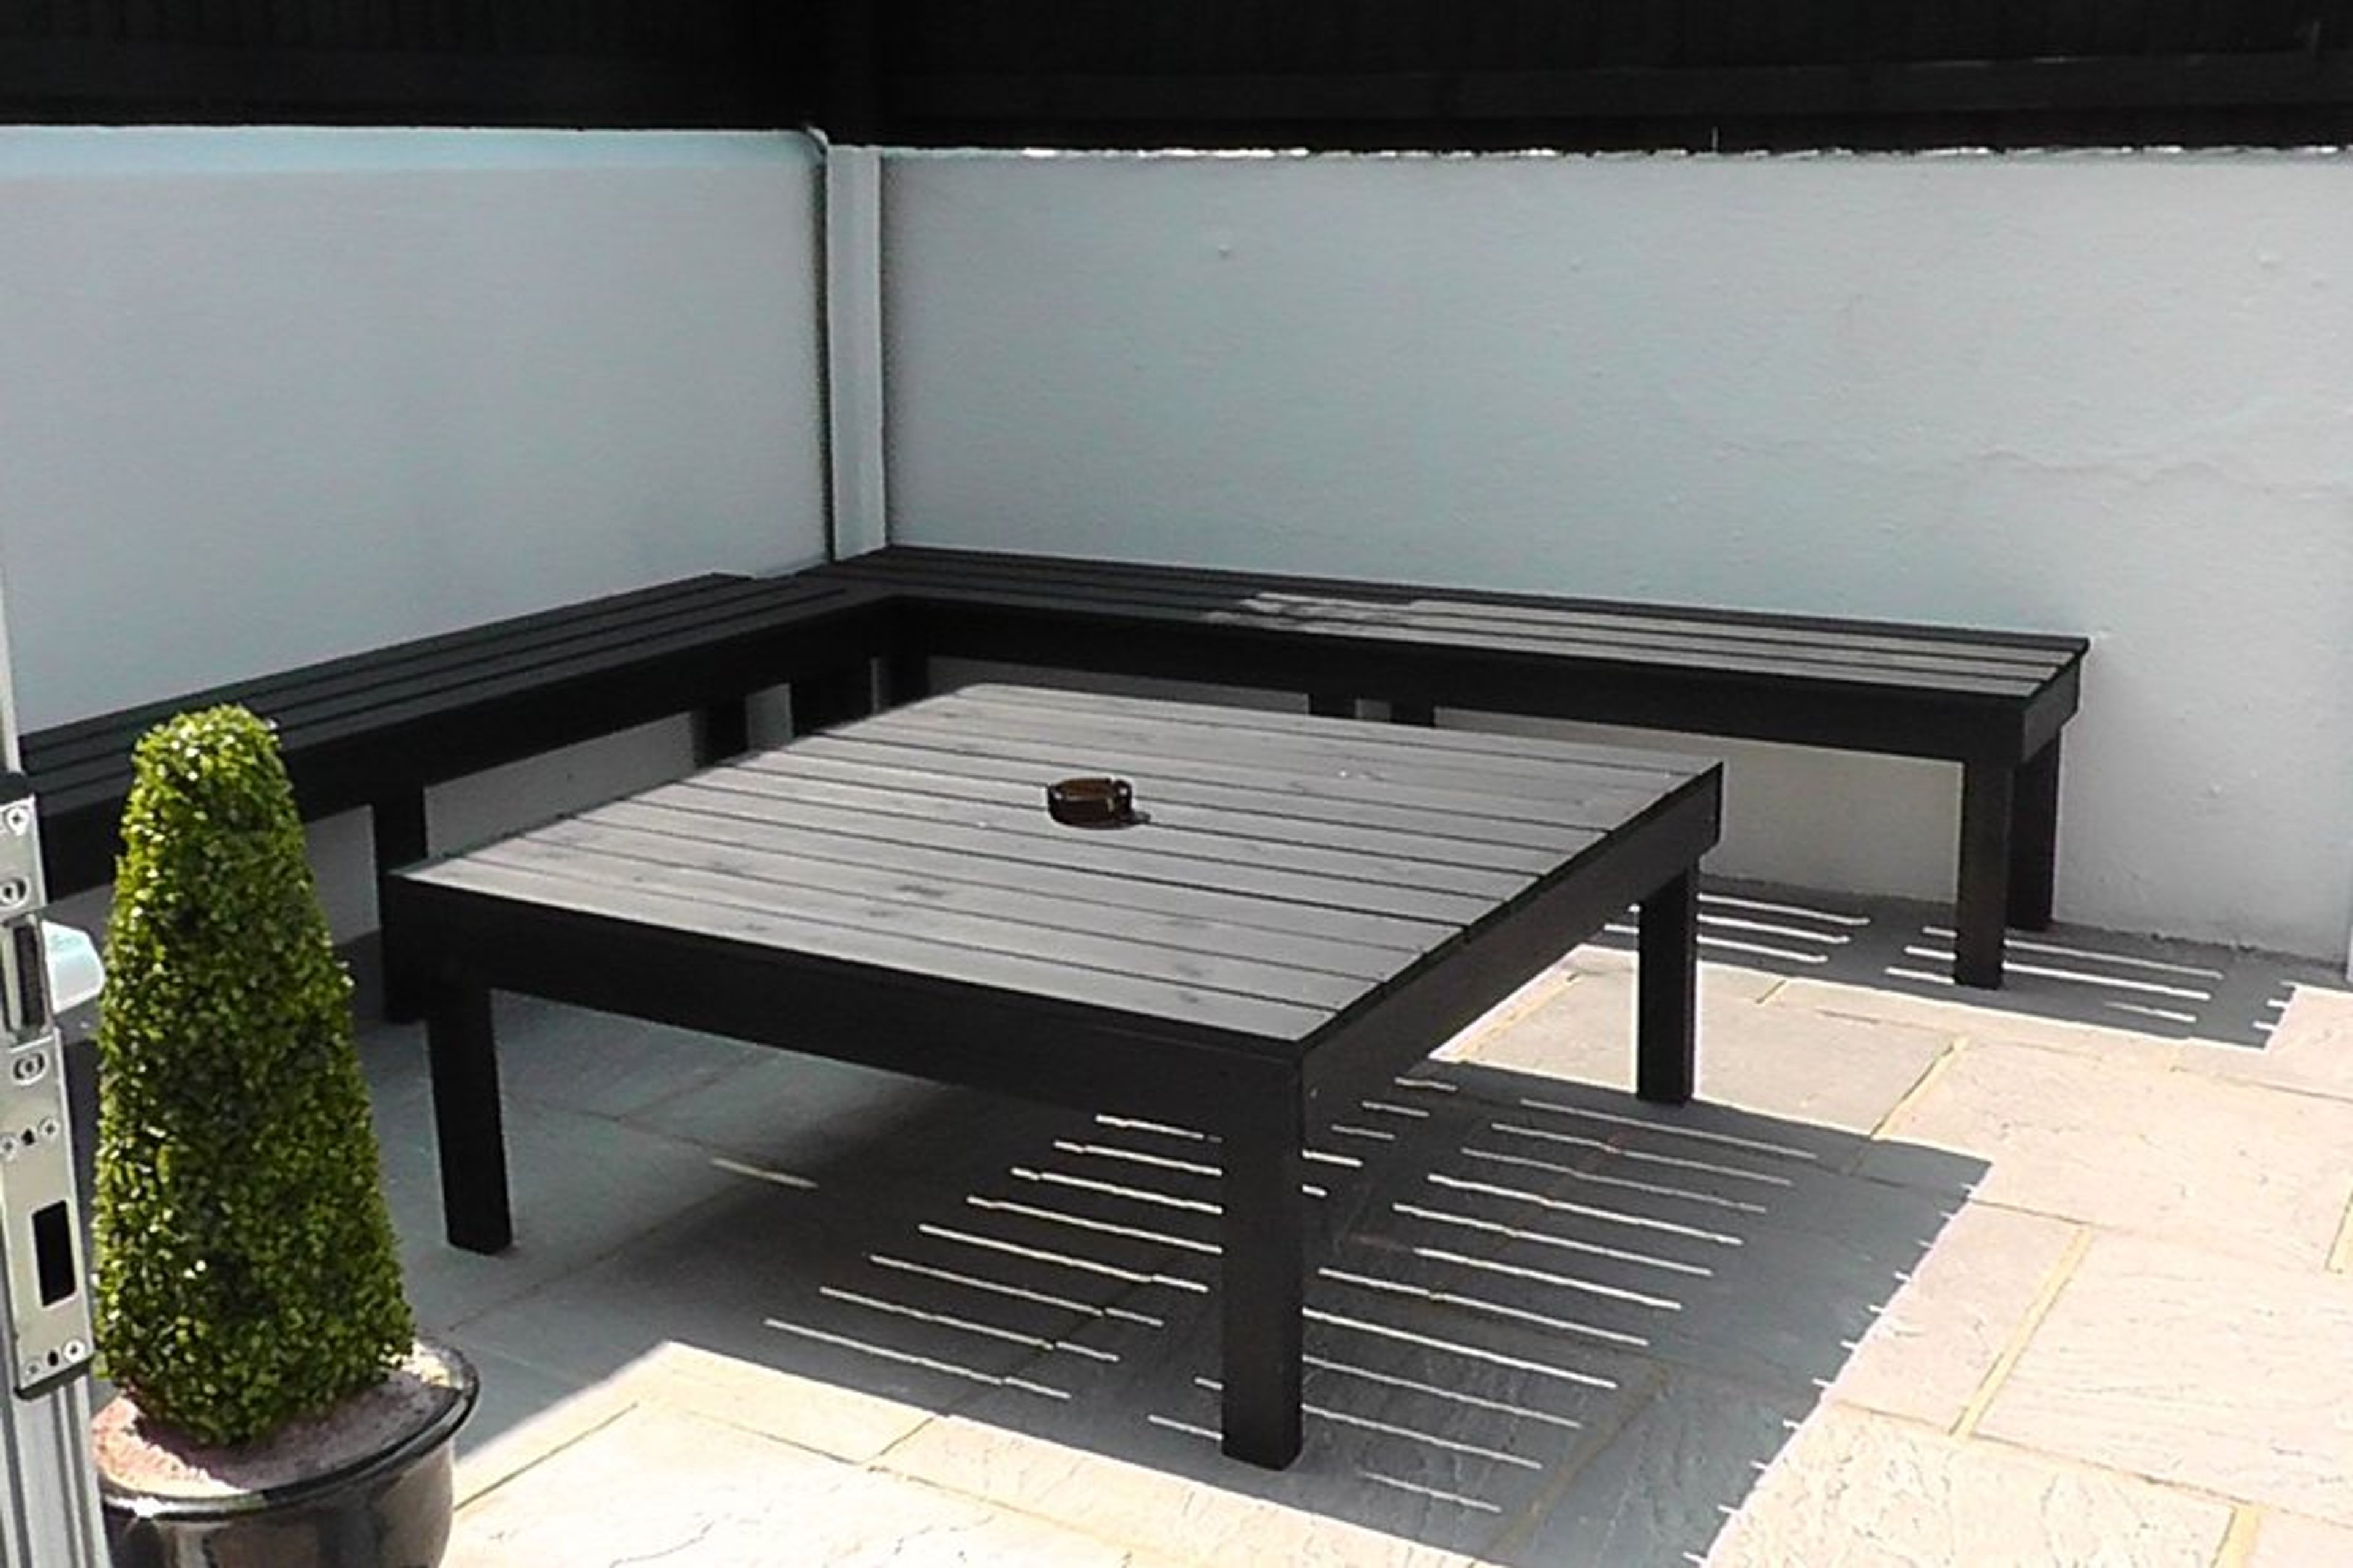 Sunny courtyard garden with seating for 12 on benches.